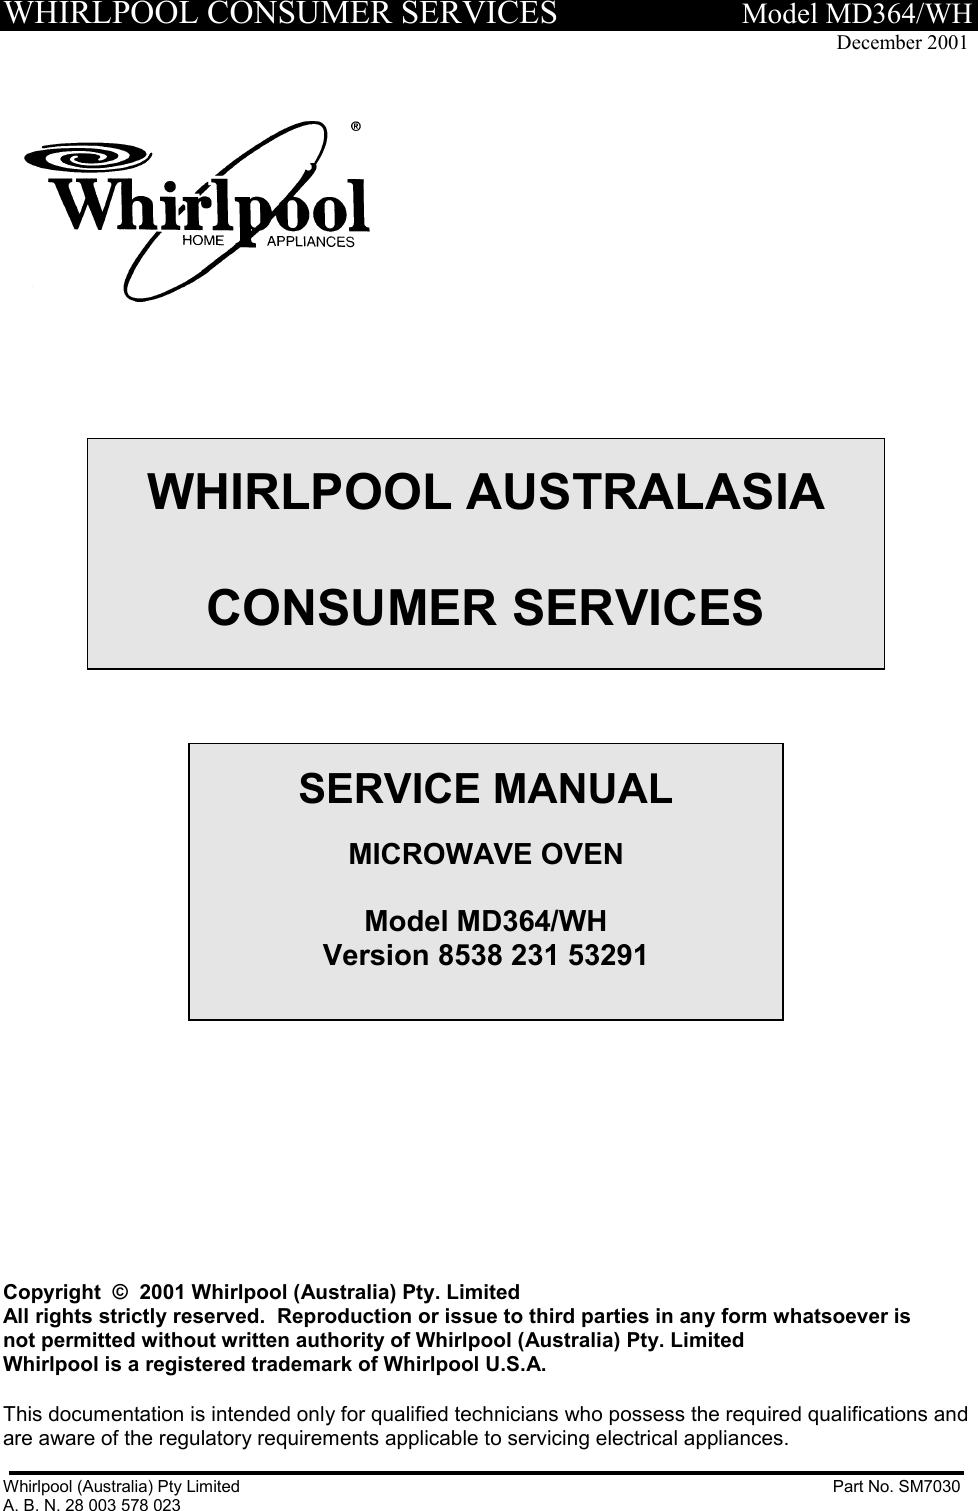 Page 1 of 10 - Whirlpool Whirlpool-Whirlpool-Microwave-Oven-Md364-Wh-Users-Manual- .TECHNICAL DATA.  Whirlpool-whirlpool-microwave-oven-md364-wh-users-manual